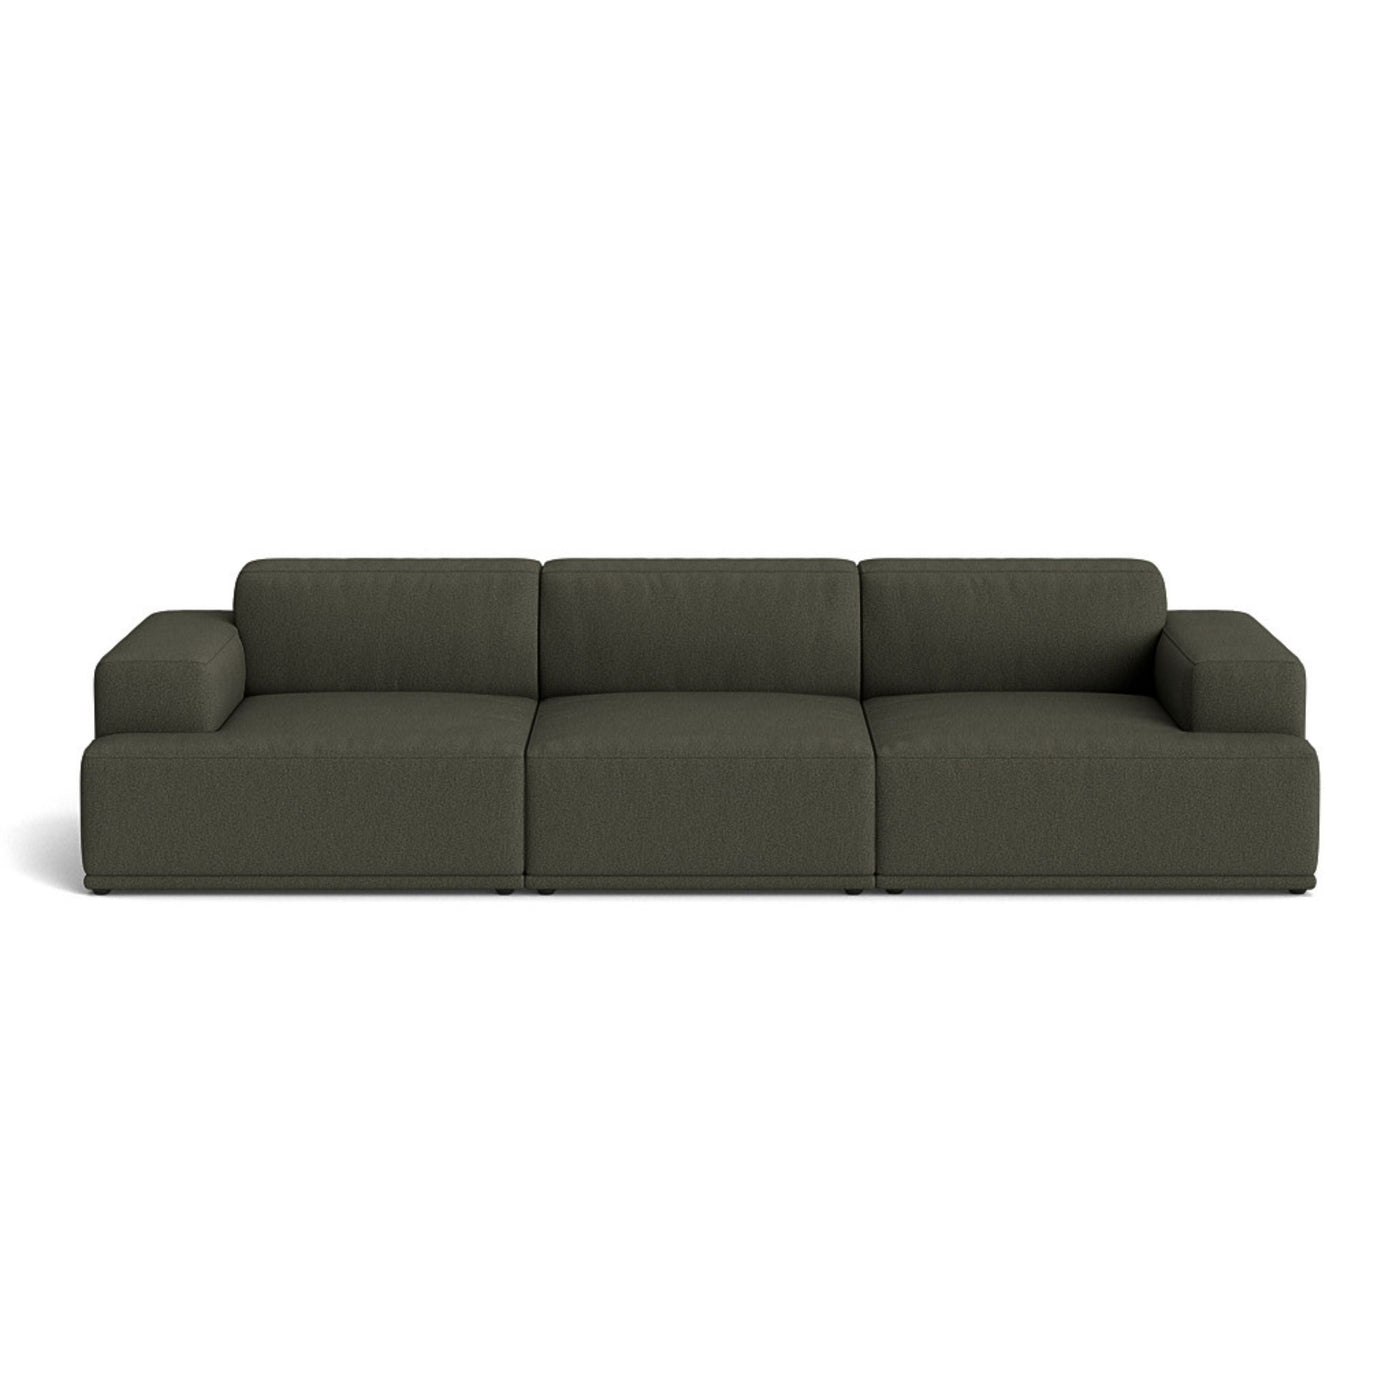 Muuto Connect Soft Modular 3 Seater Sofa, configuration 1. Made-to-order from someday designs. #colour_clay-14